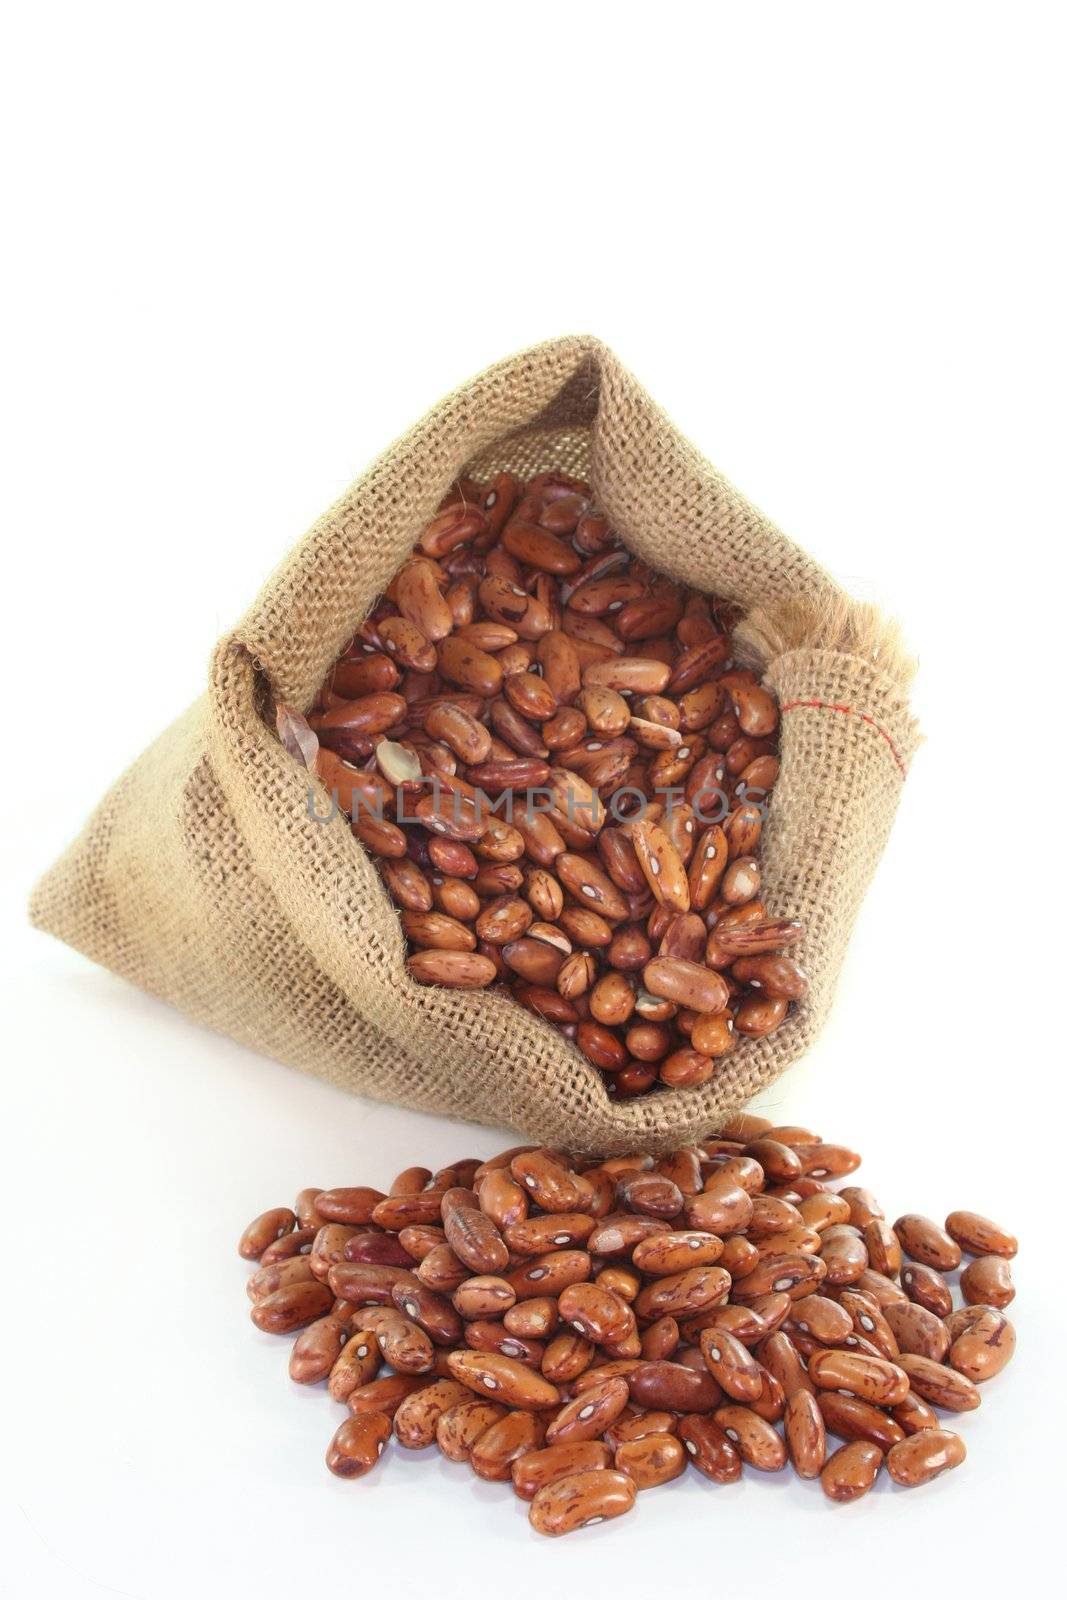 dried pinto beans in a jute sack
